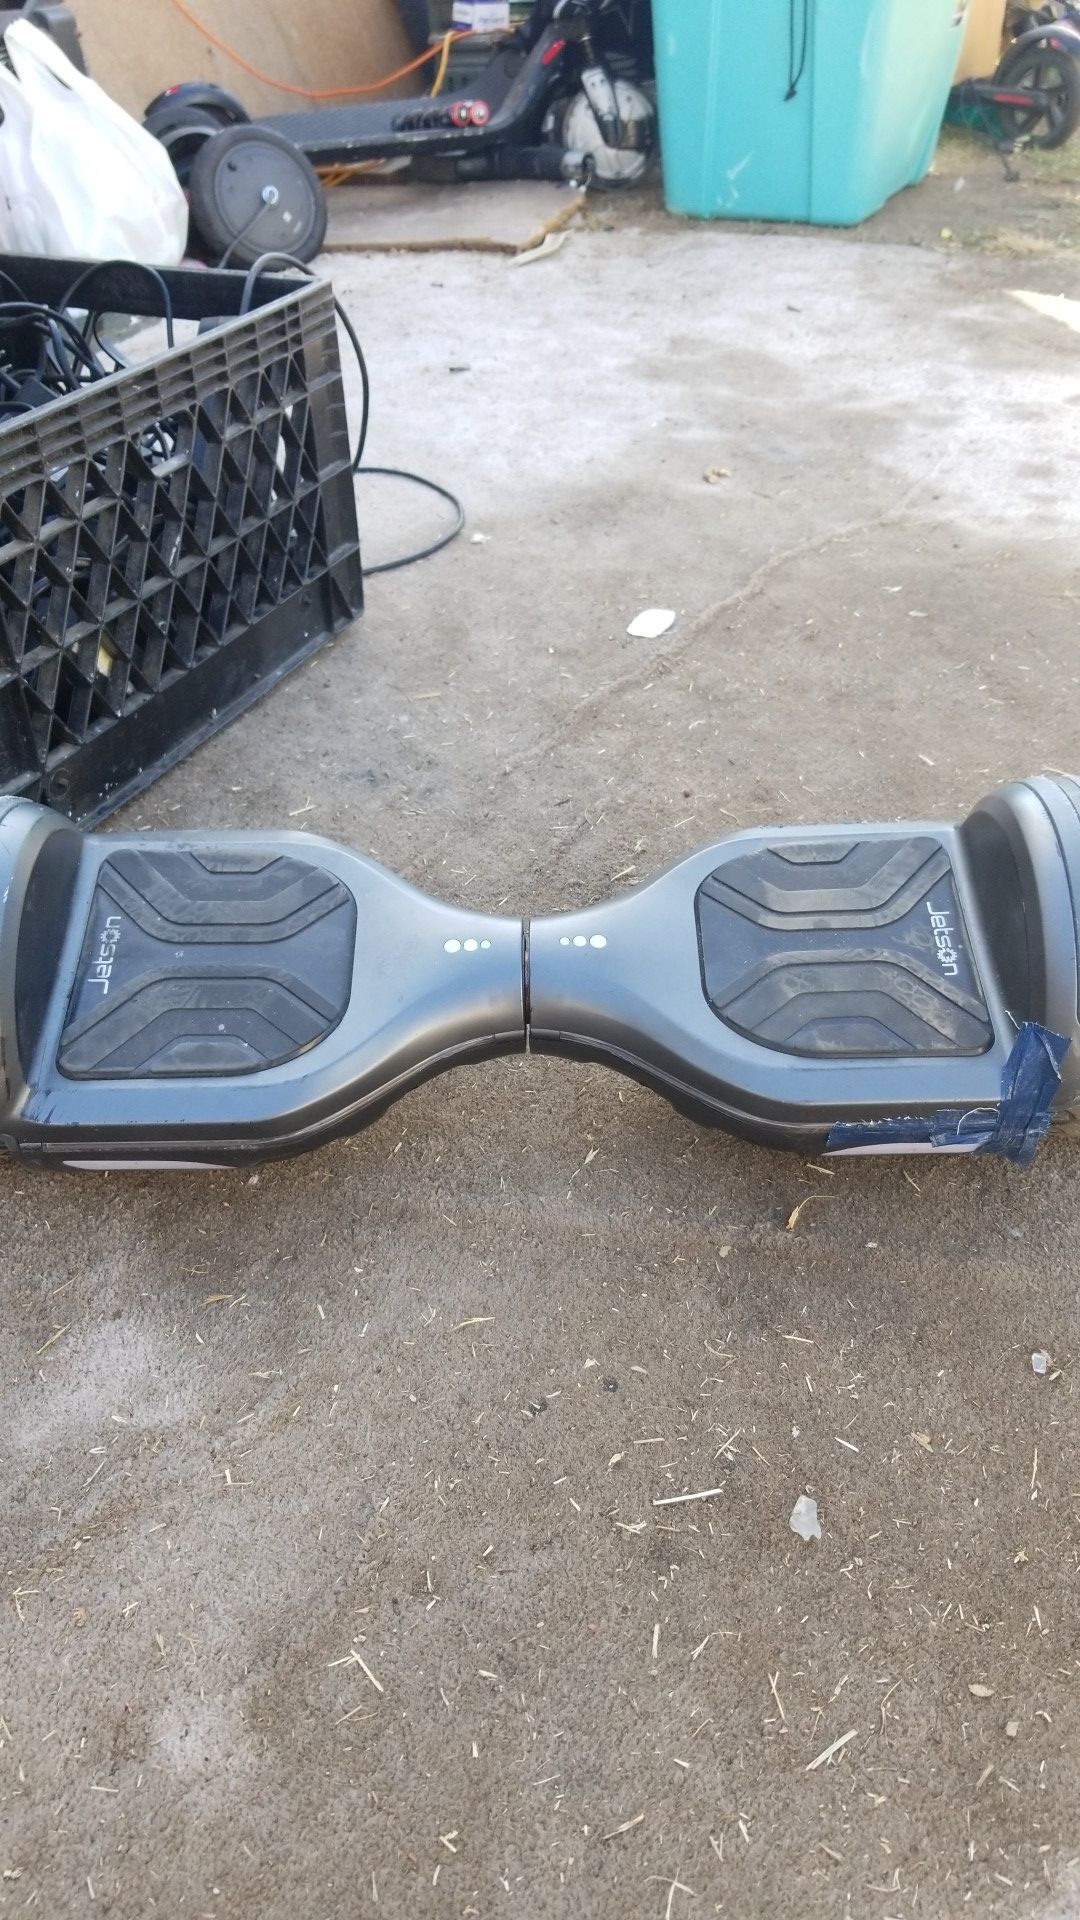 Jetson hoverboard best offer takes